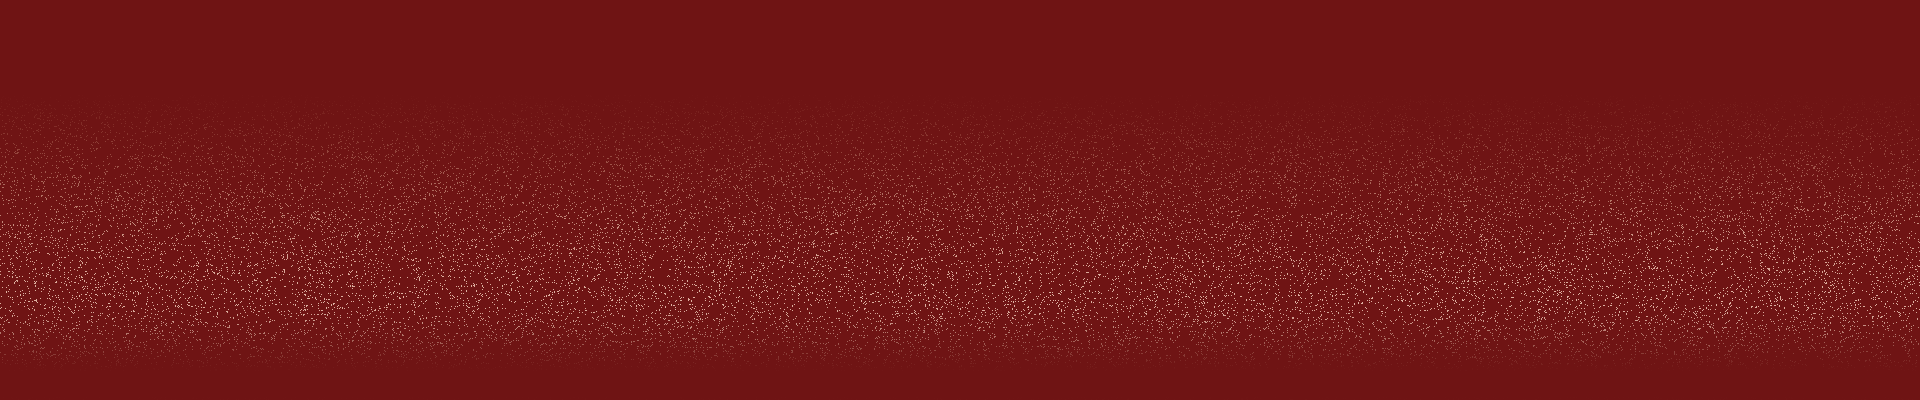 Red_sand_background.png